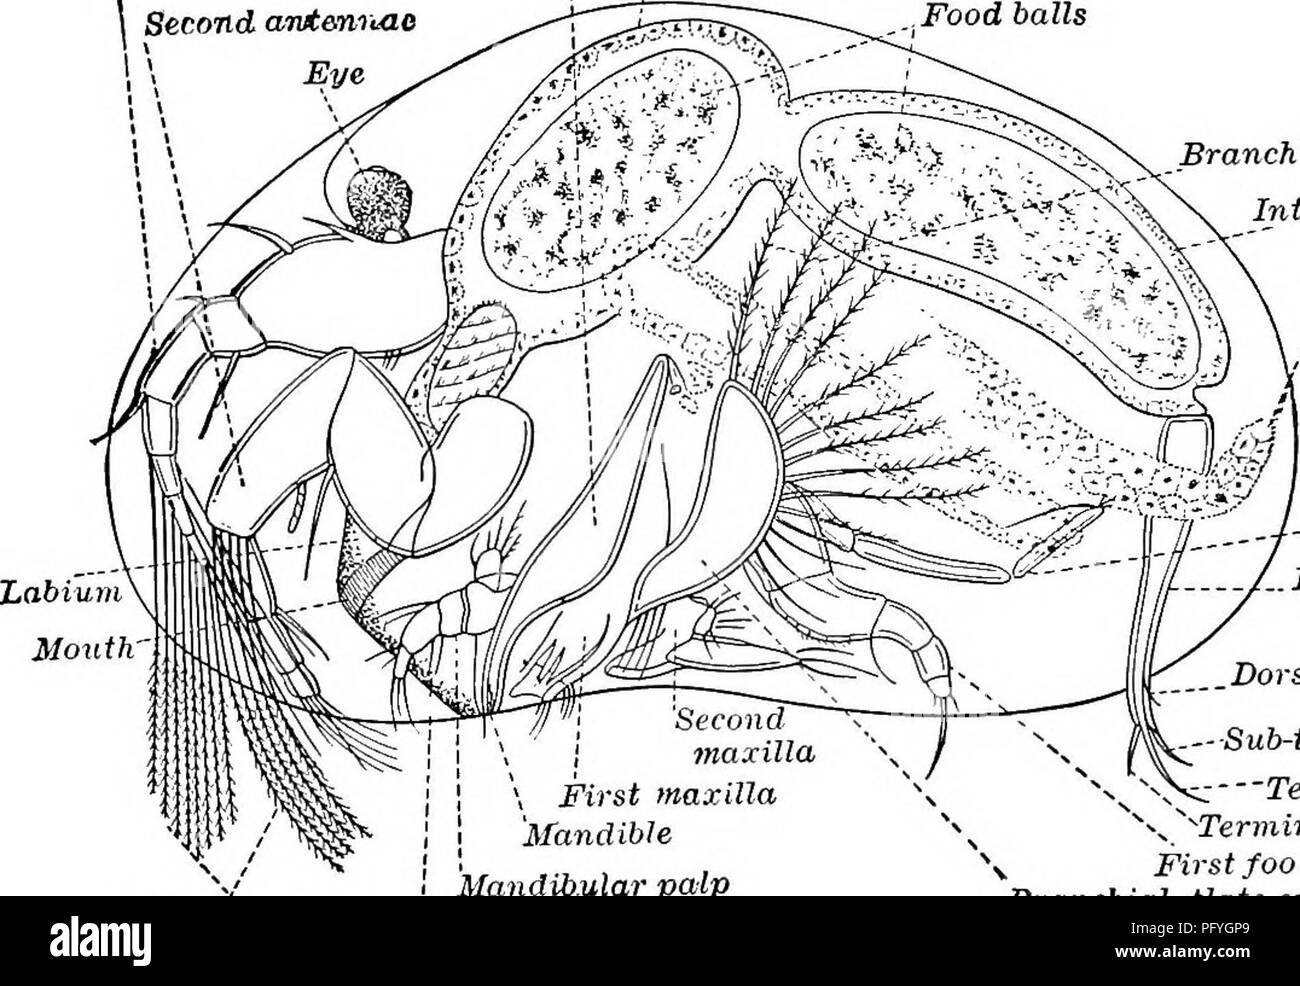 . Fresh-water biology. Freshwater biology. 792 FRESH-WATER BIOLOGY forms a thin membrane, reenforced by a pair of vety strong chitinous rods, each expanded into a transverse plate armed at their extremi- ties with a series of about seven strong teeth. Posteriorly the lip joins a sternumlike vaulted plate, carinated along the middle, and placed between the bases of the first pair of maxillae. J'irst antenjujLC  Second antenruie Eye Branchial Plate of Mandible j Stomach ^.Food balls. Branchial eetae Intesivne Ovary Mandibular palp Natatory setae Labrum Second foot Furca Dorsal seta -Sub-termina Stock Photo